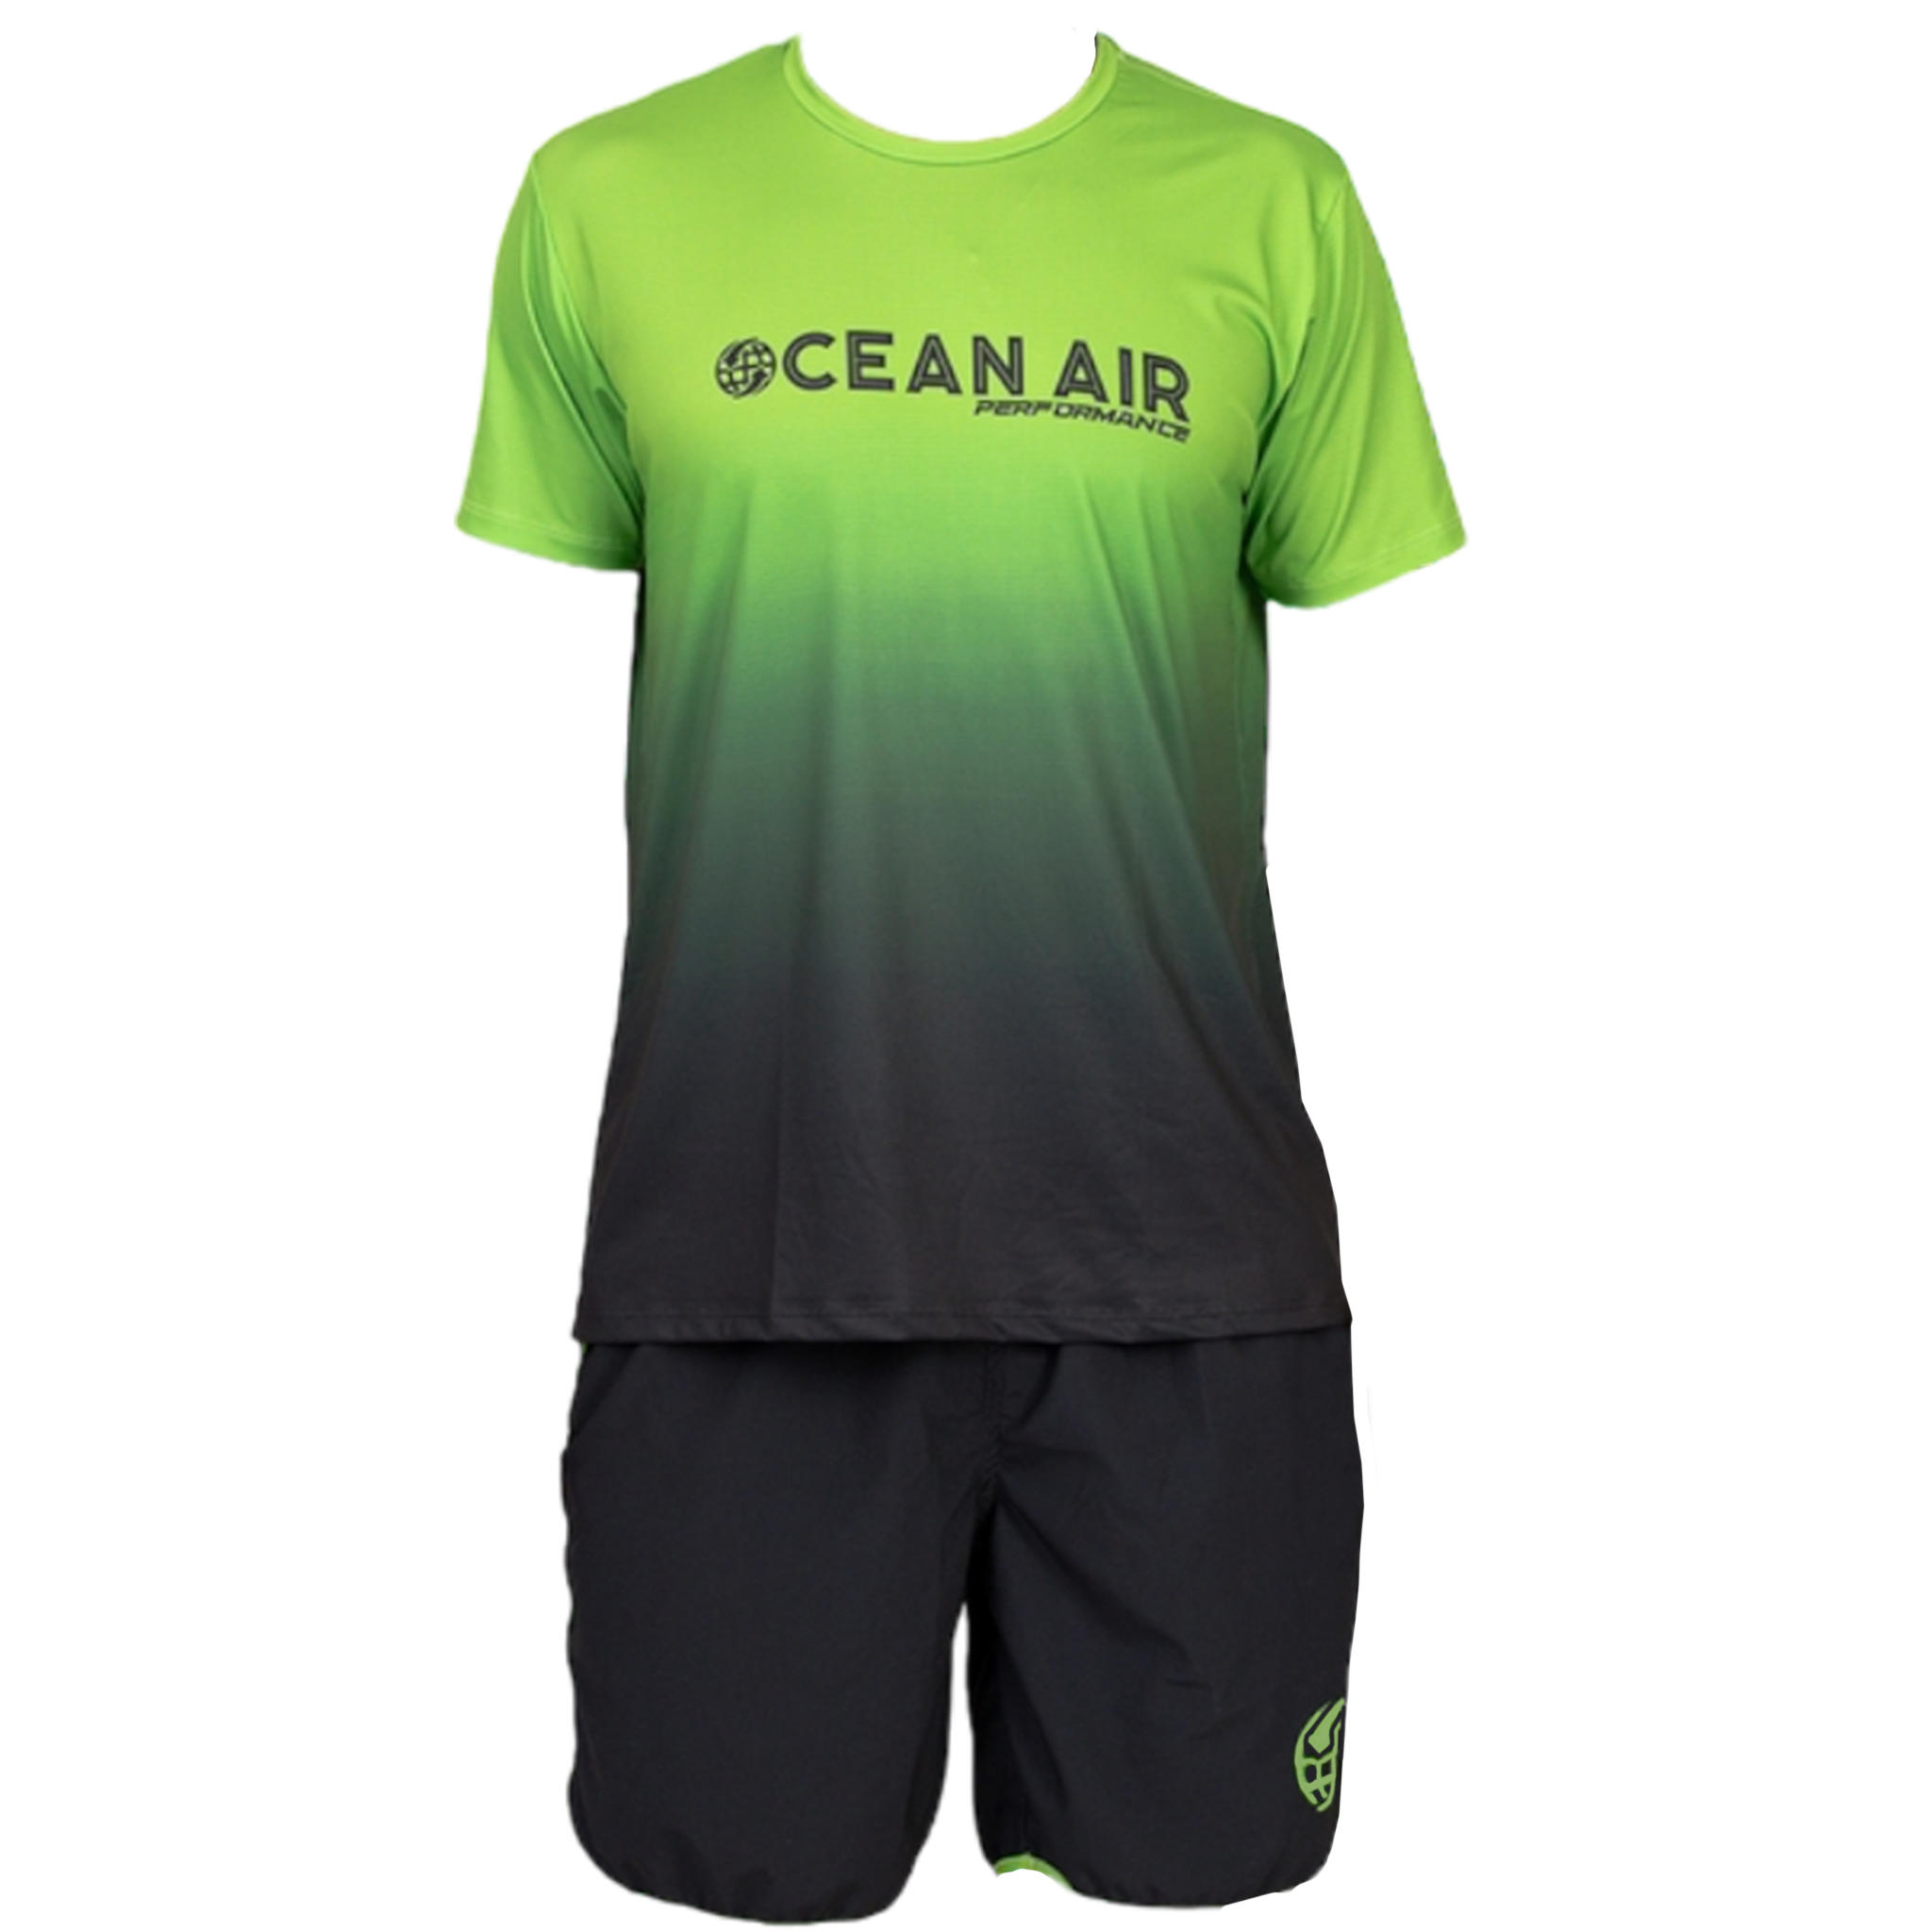 Ocean Air Ombre Set Fall Colletion - Green / Black